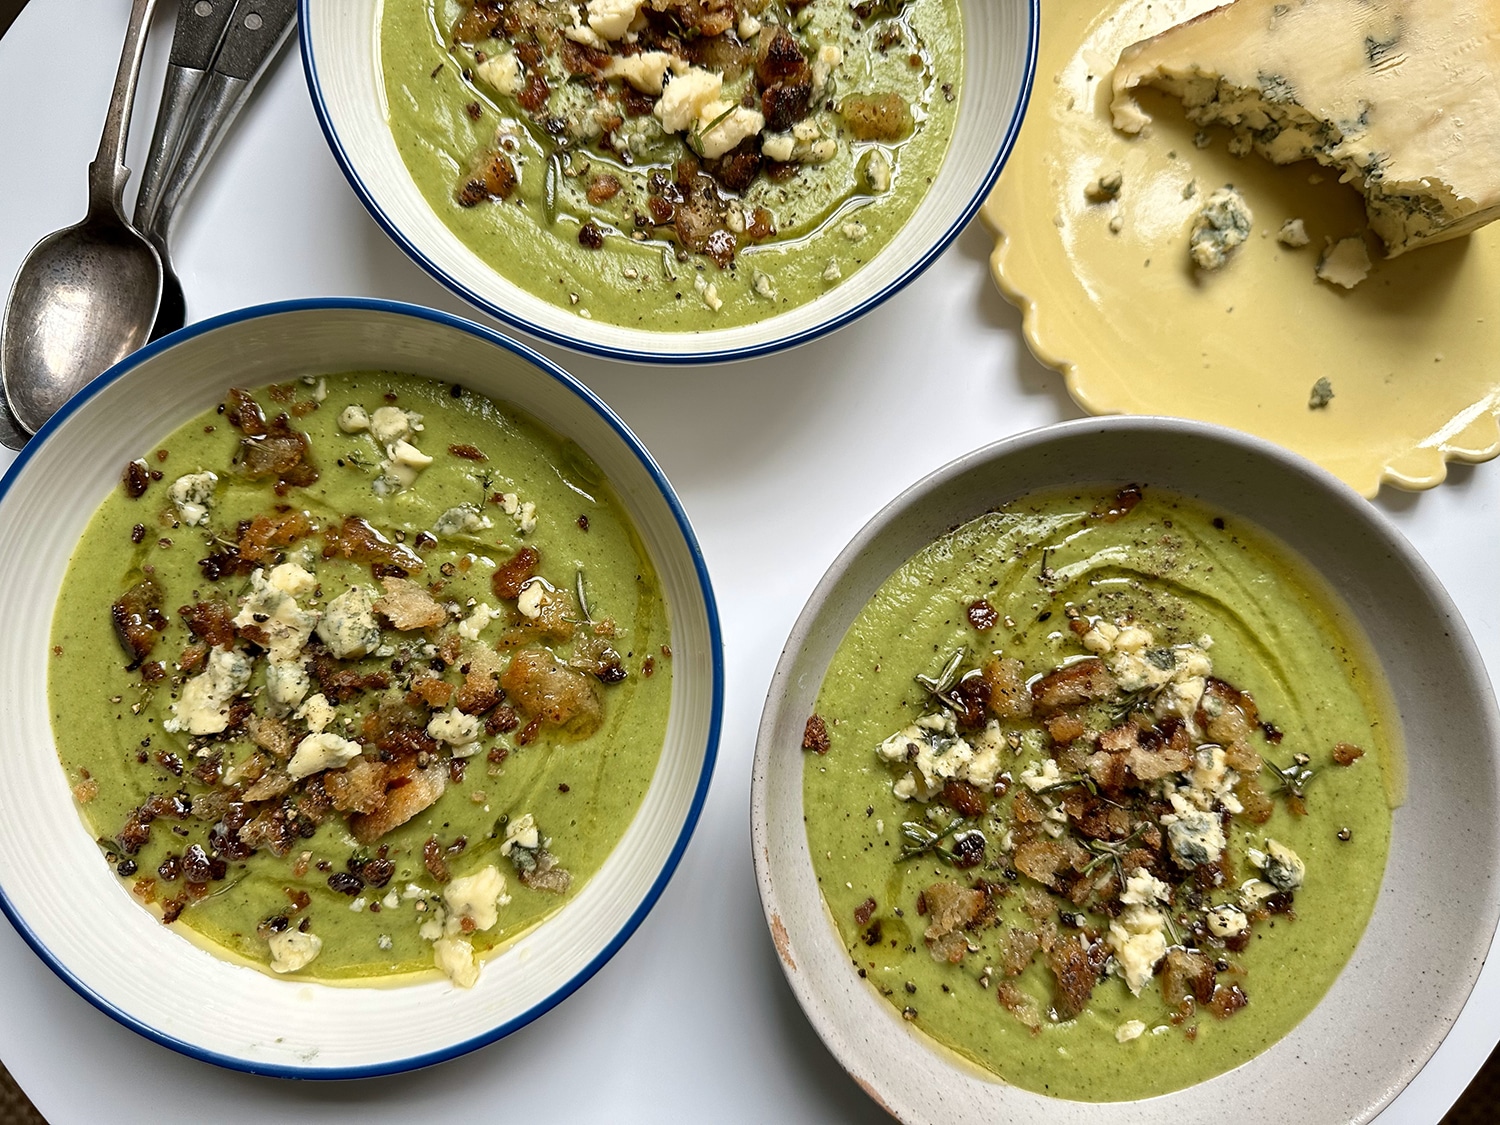 A broccoli and stilton soup made with Borough Market ingredients